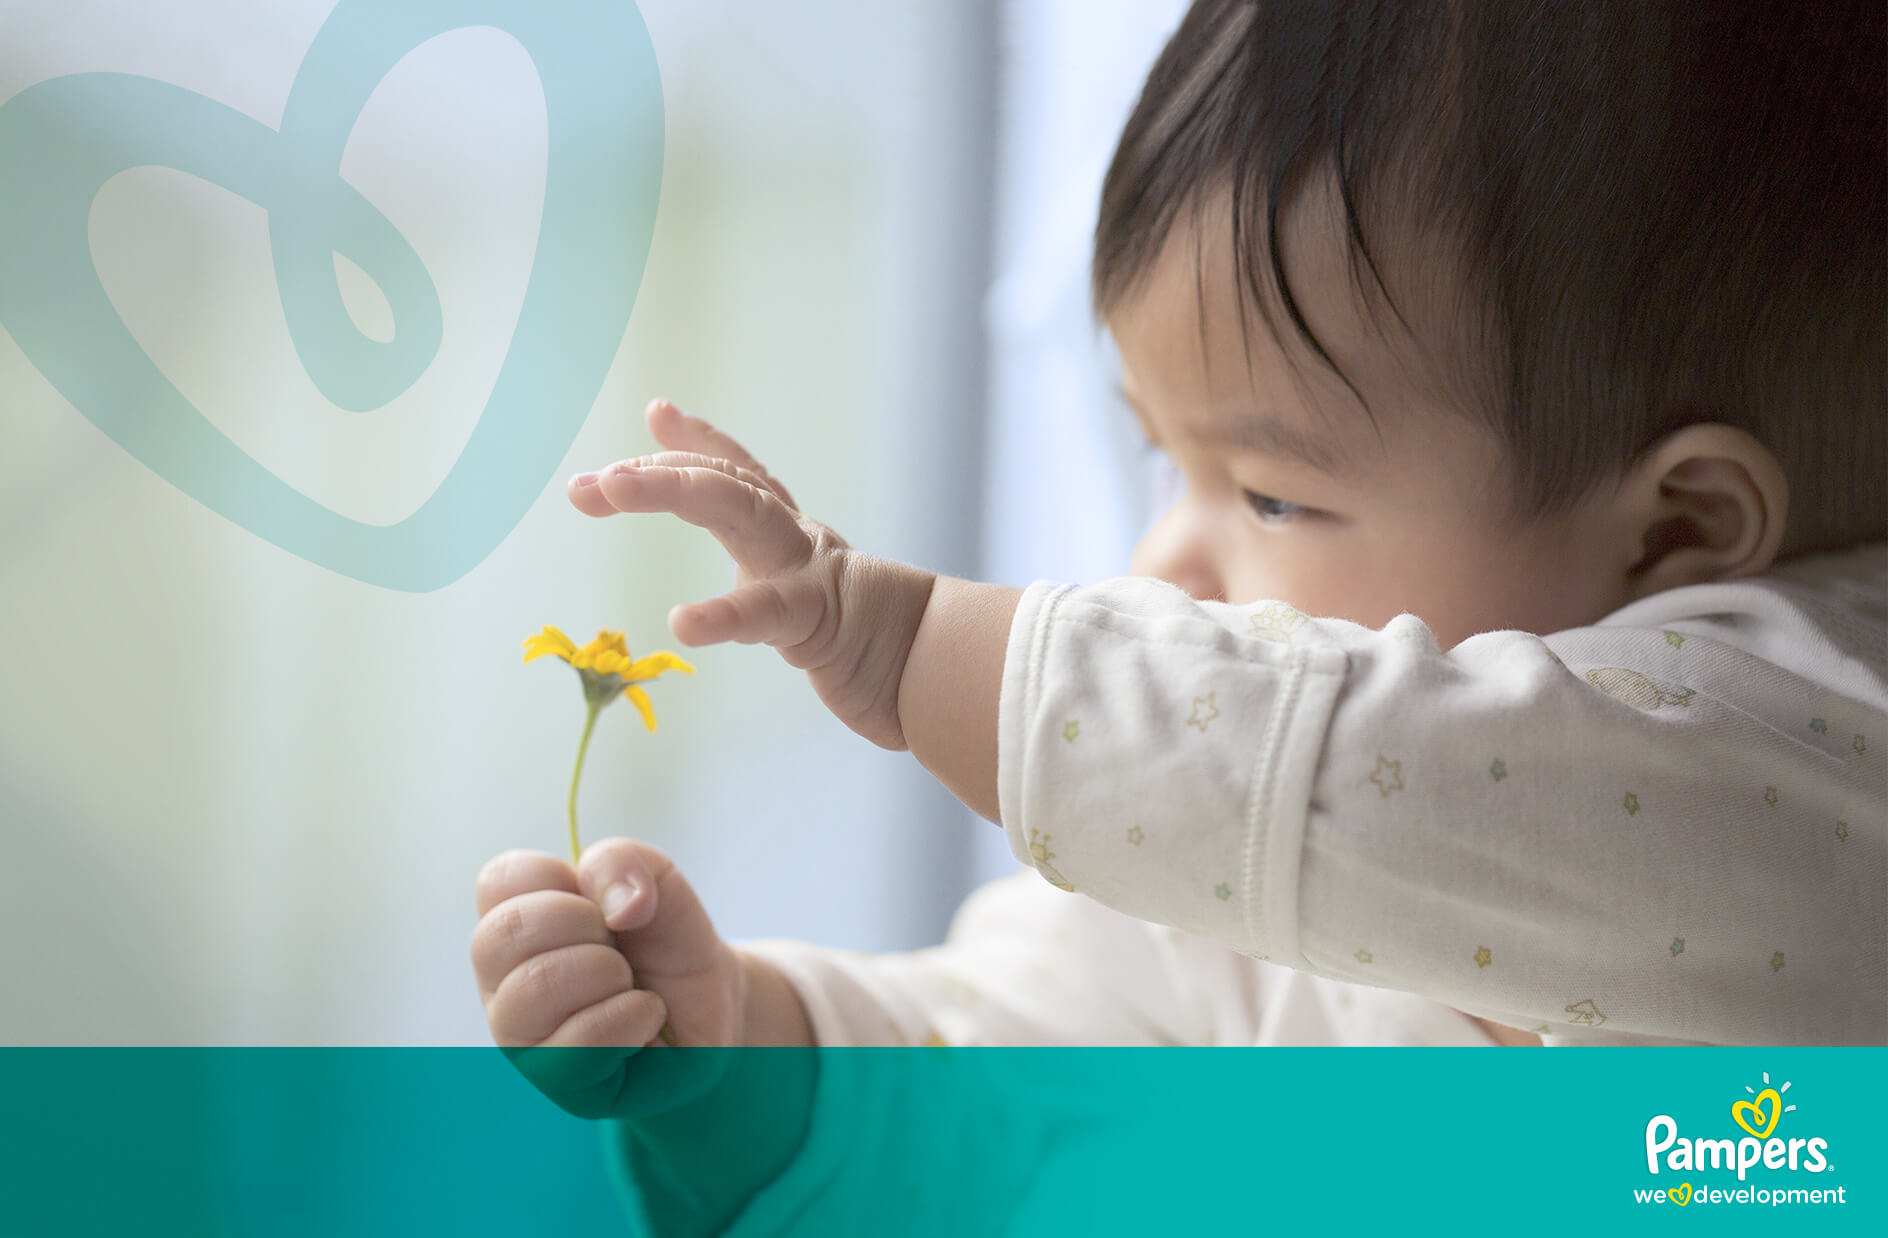 Pampers Development Campaign